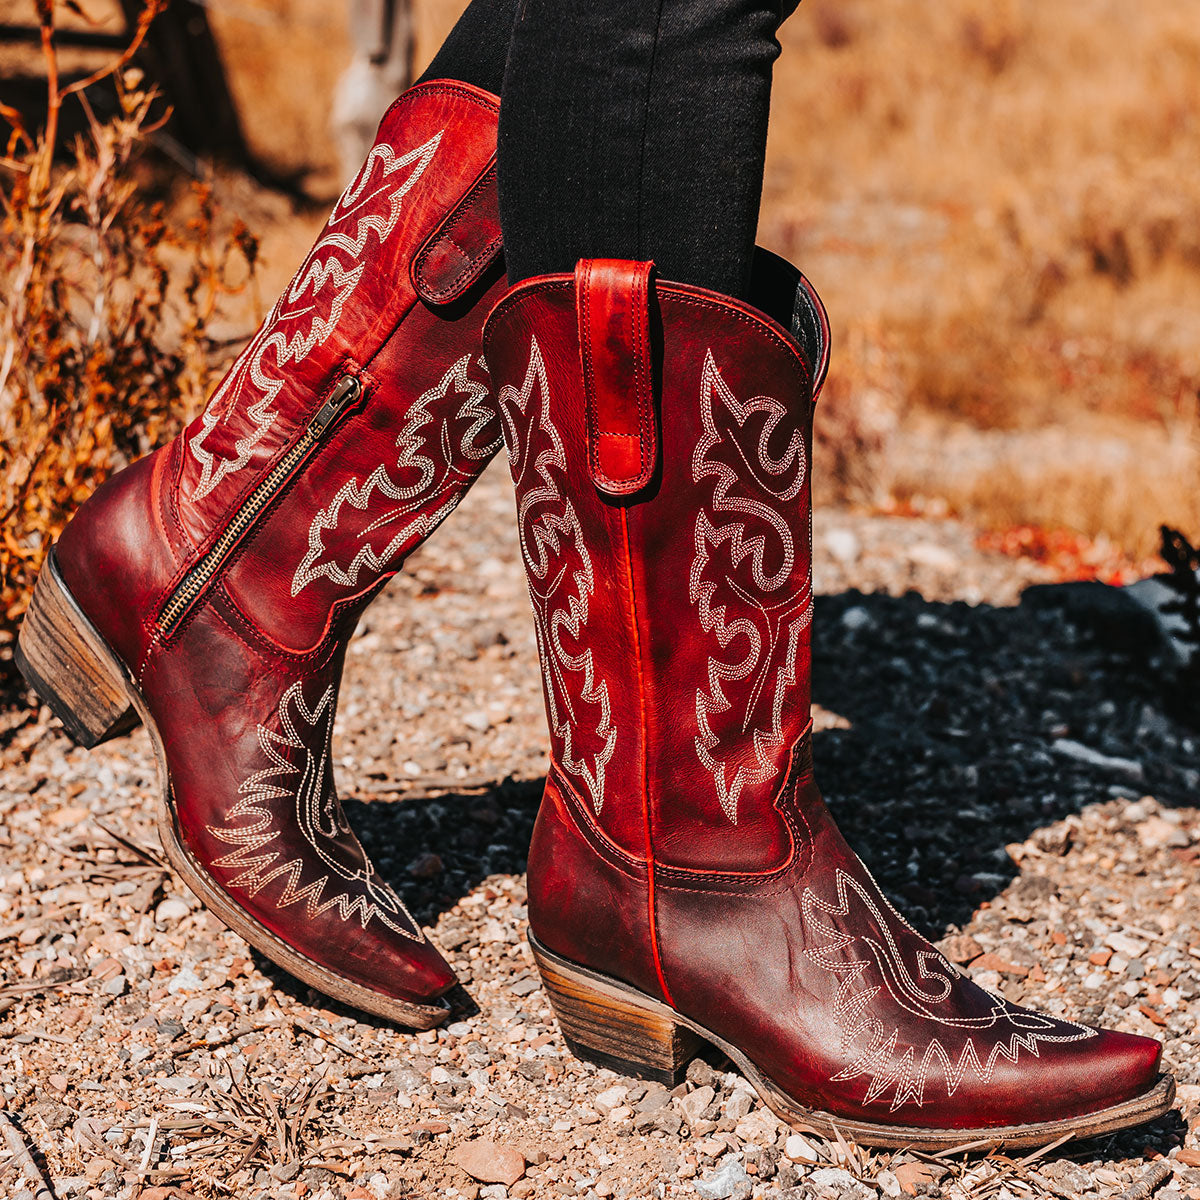 FREEBIRD women's Wilson wine leather western boot with snip toe construction, intricate shaft and toe stitching, and half zip closure